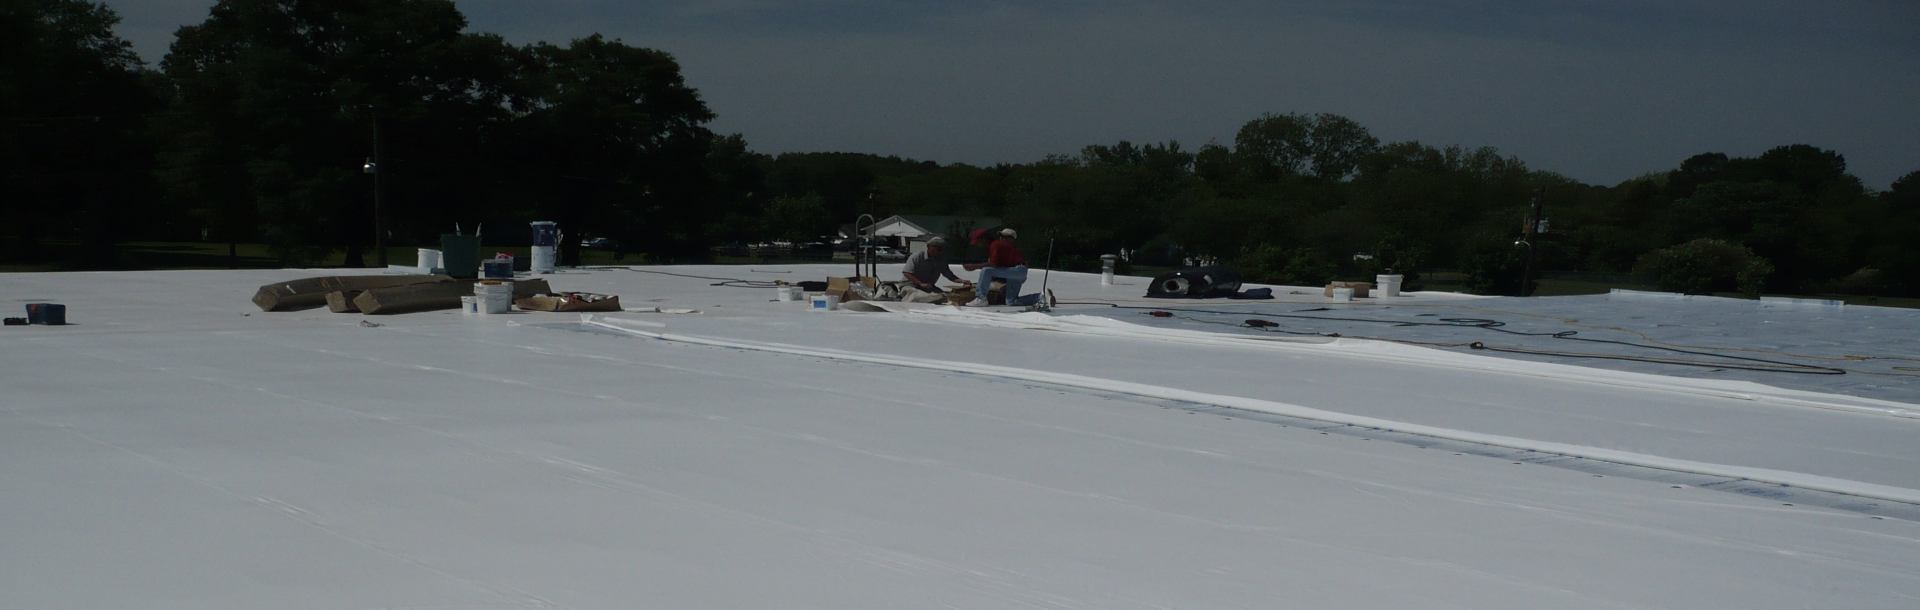 Industrial / Commercial Roofing and General Contracting